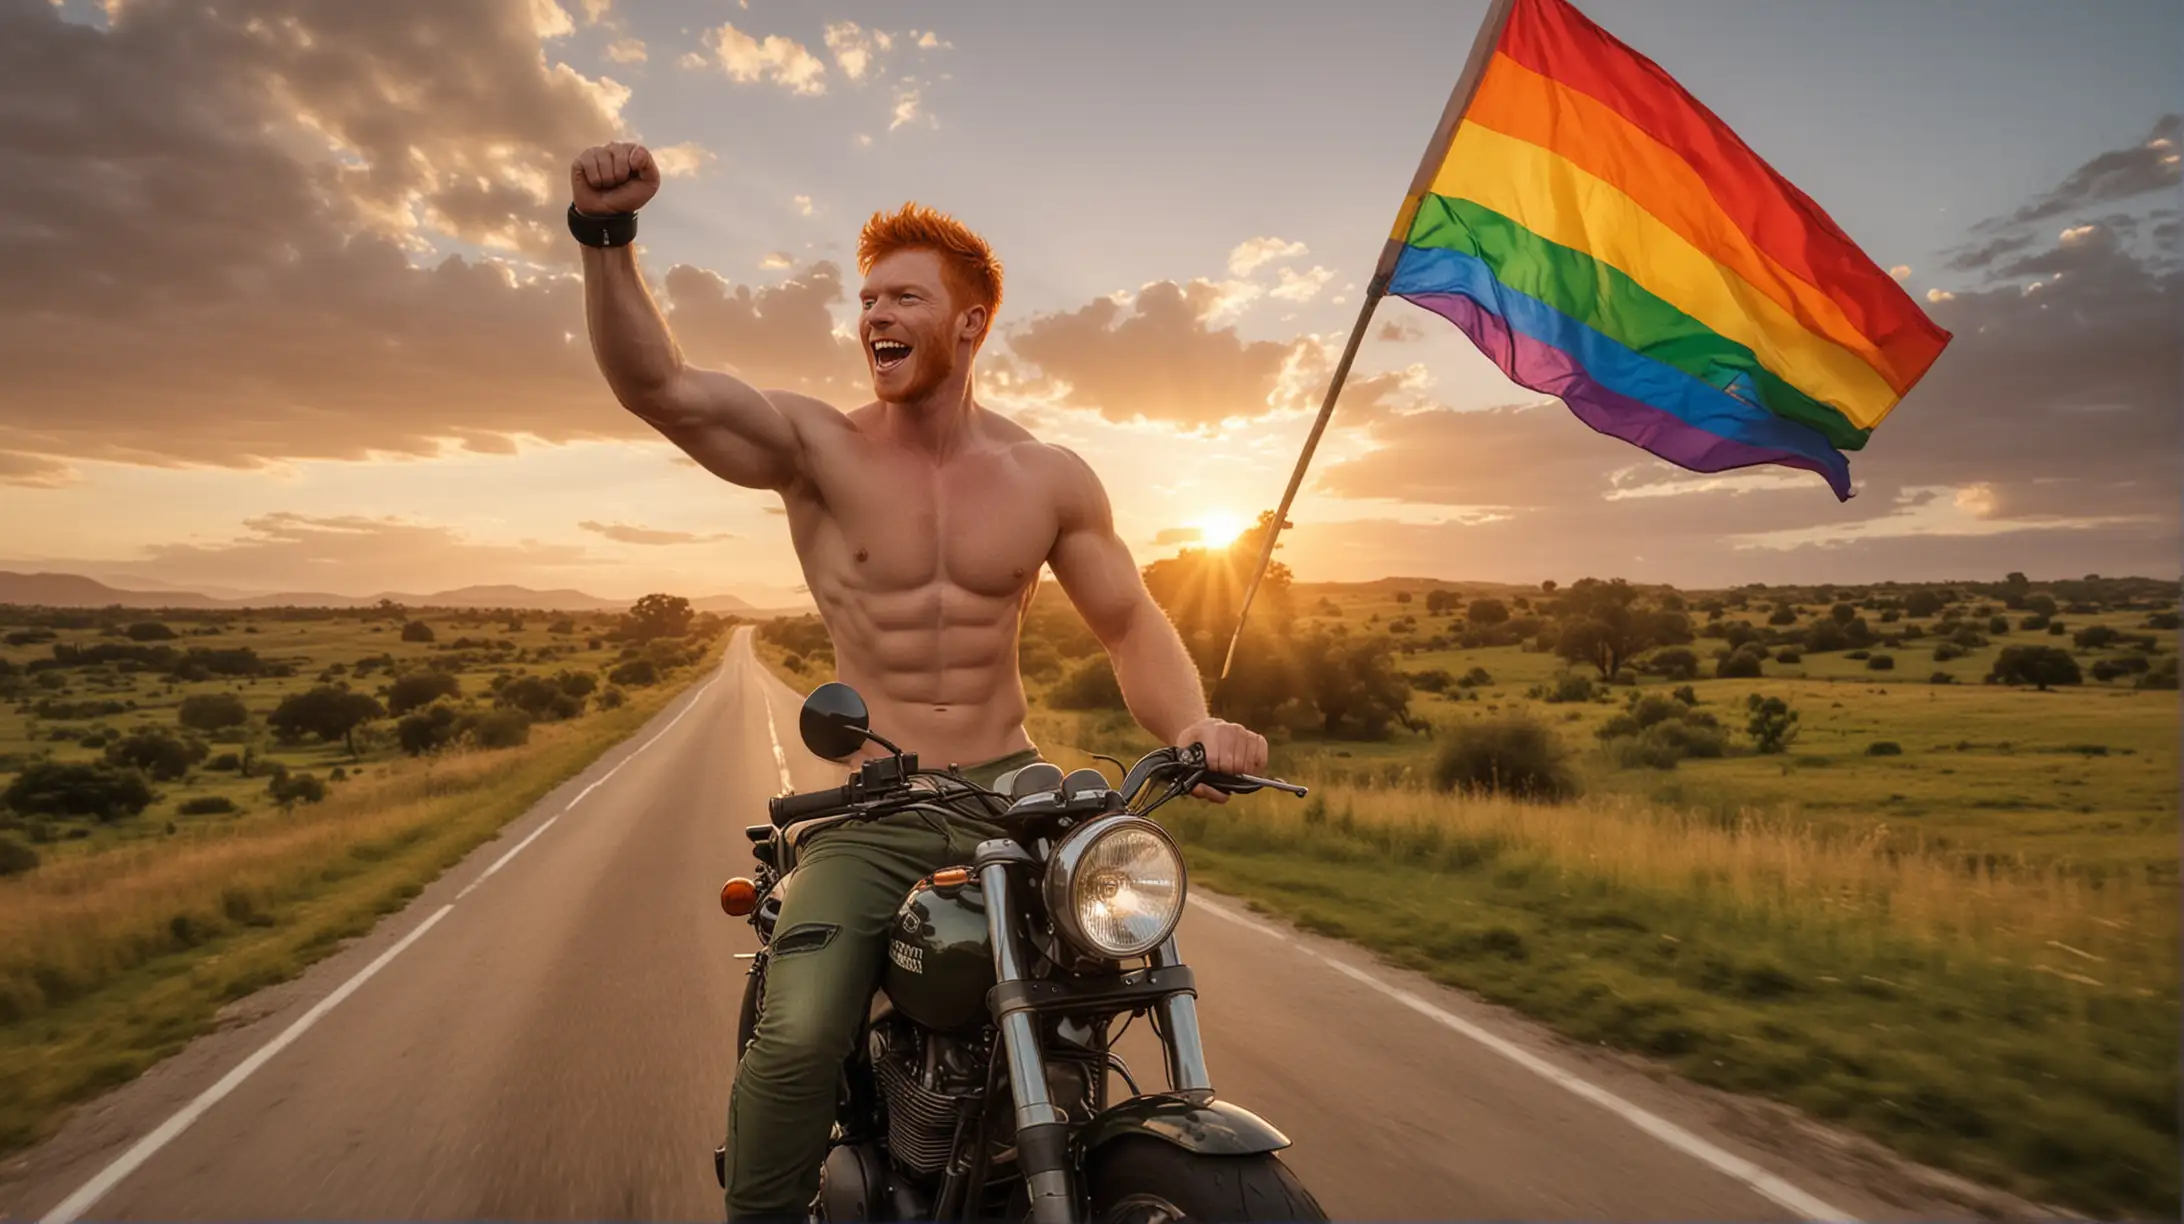 Shirtless Ginger Hunk Riding Motorcycle at Sunset with Pride Flag